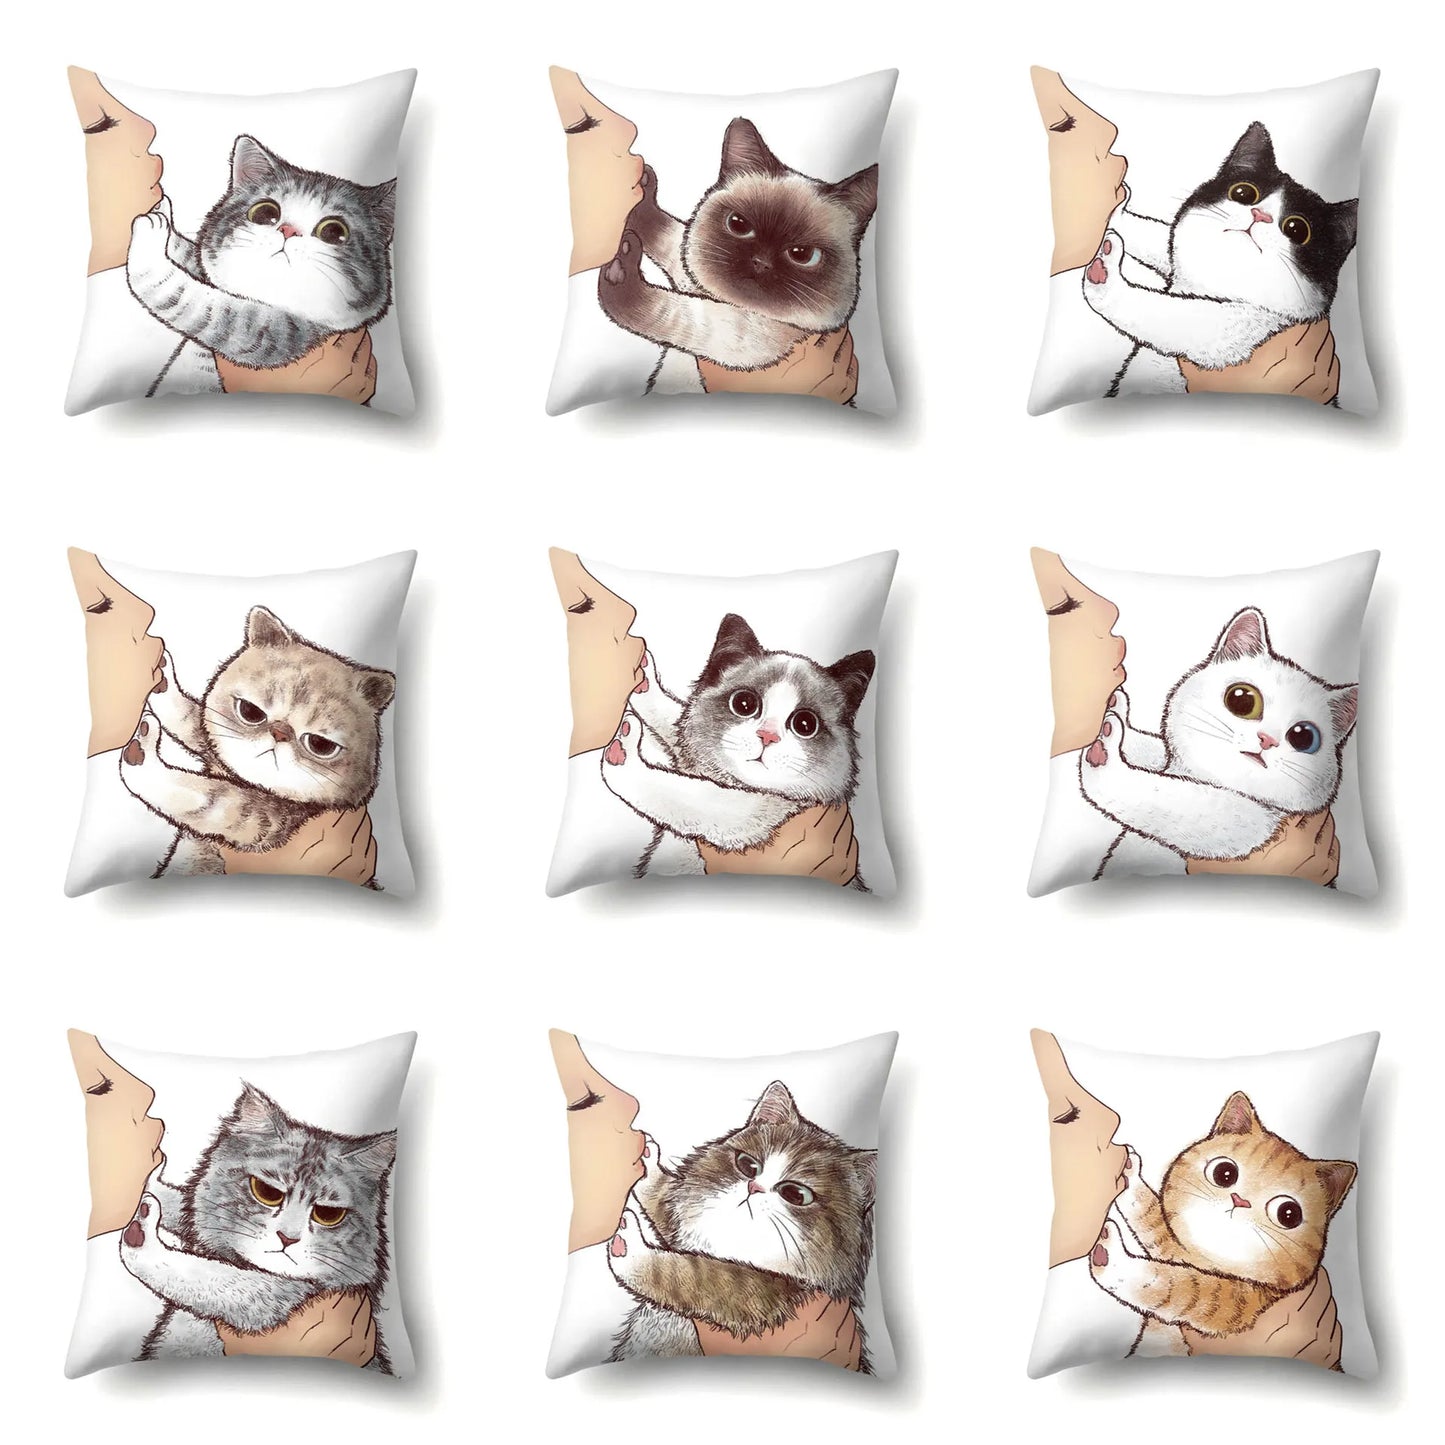 Cat Creative Decorative cushions Pillow Covers Decorative sofa cushions cat paw cushion case 45*45cm embroidered cushion covers